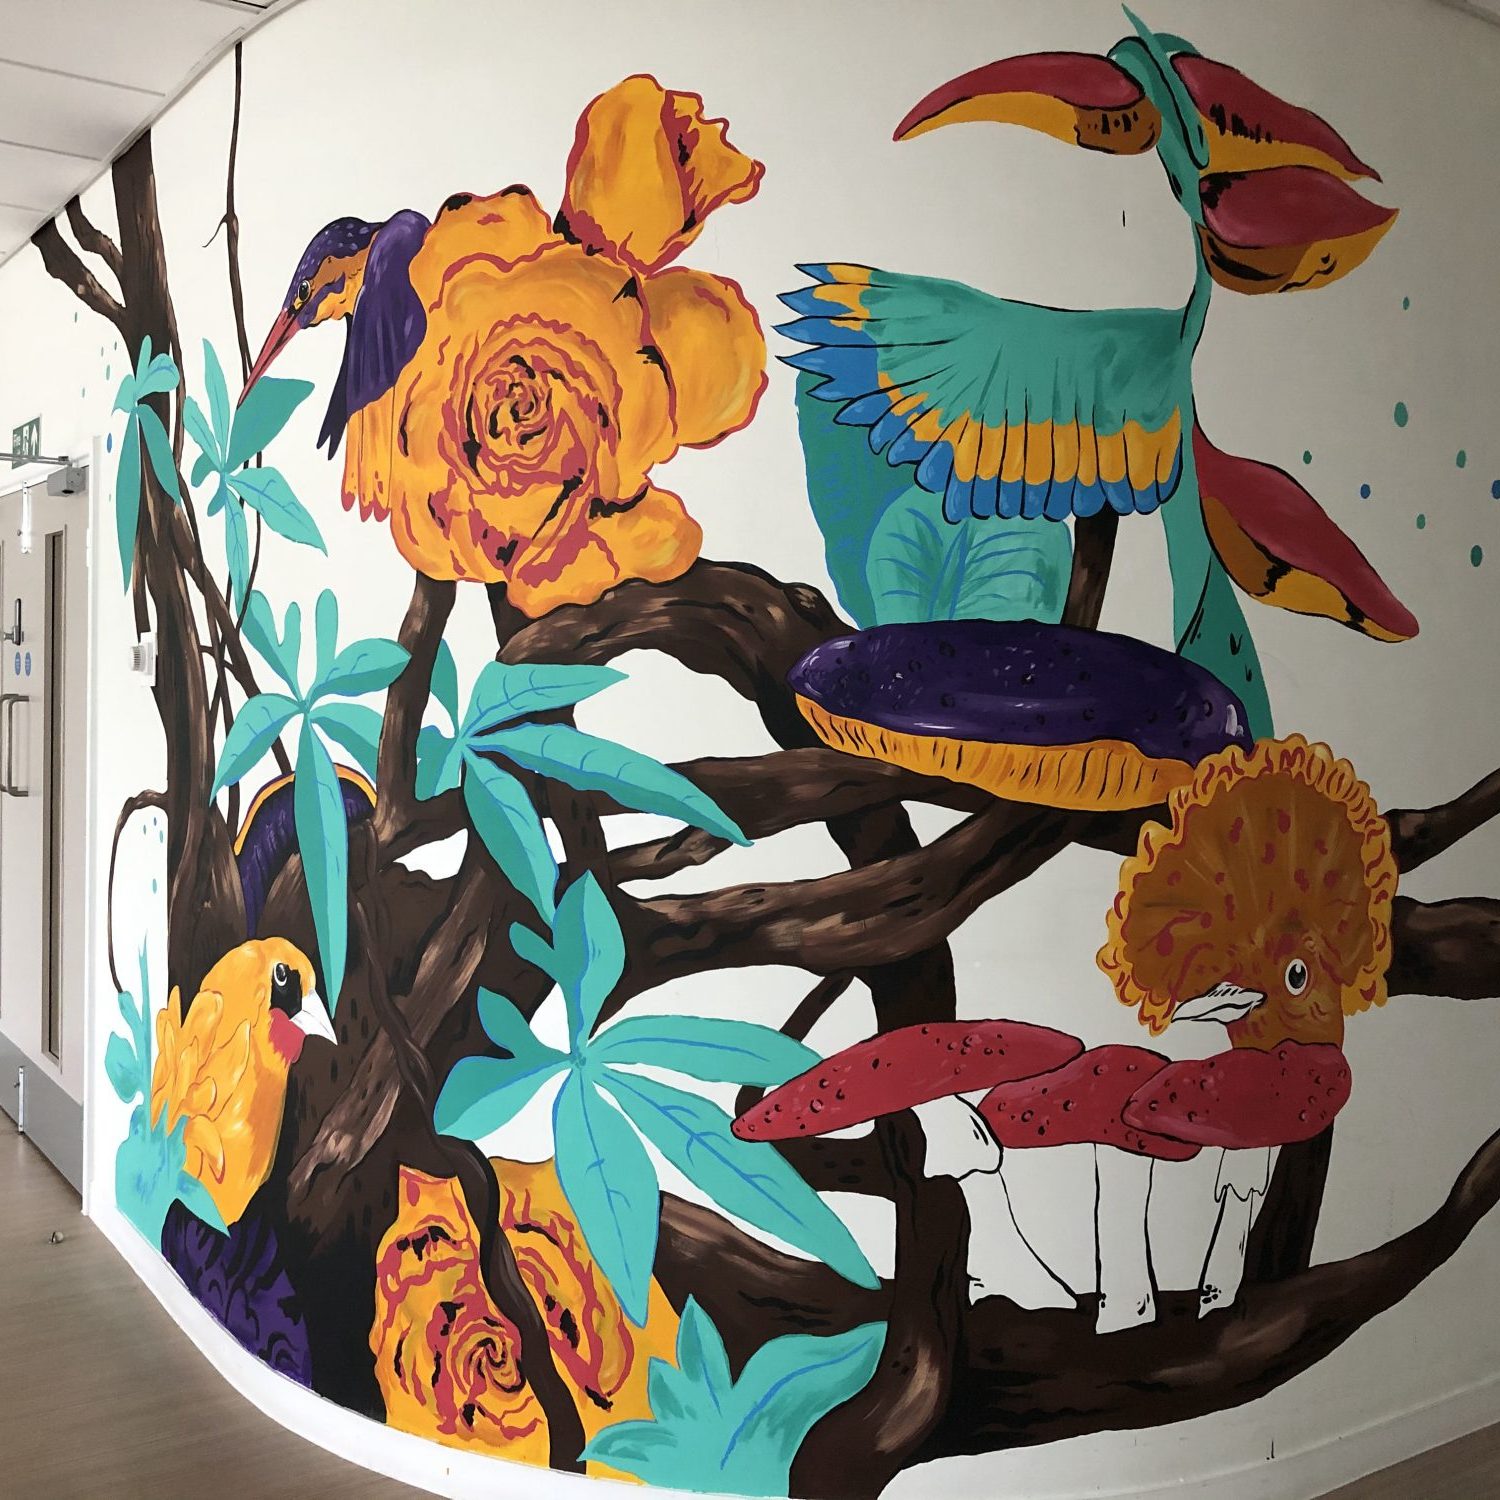 A mural featuring birds, flowers branches and mushrooms